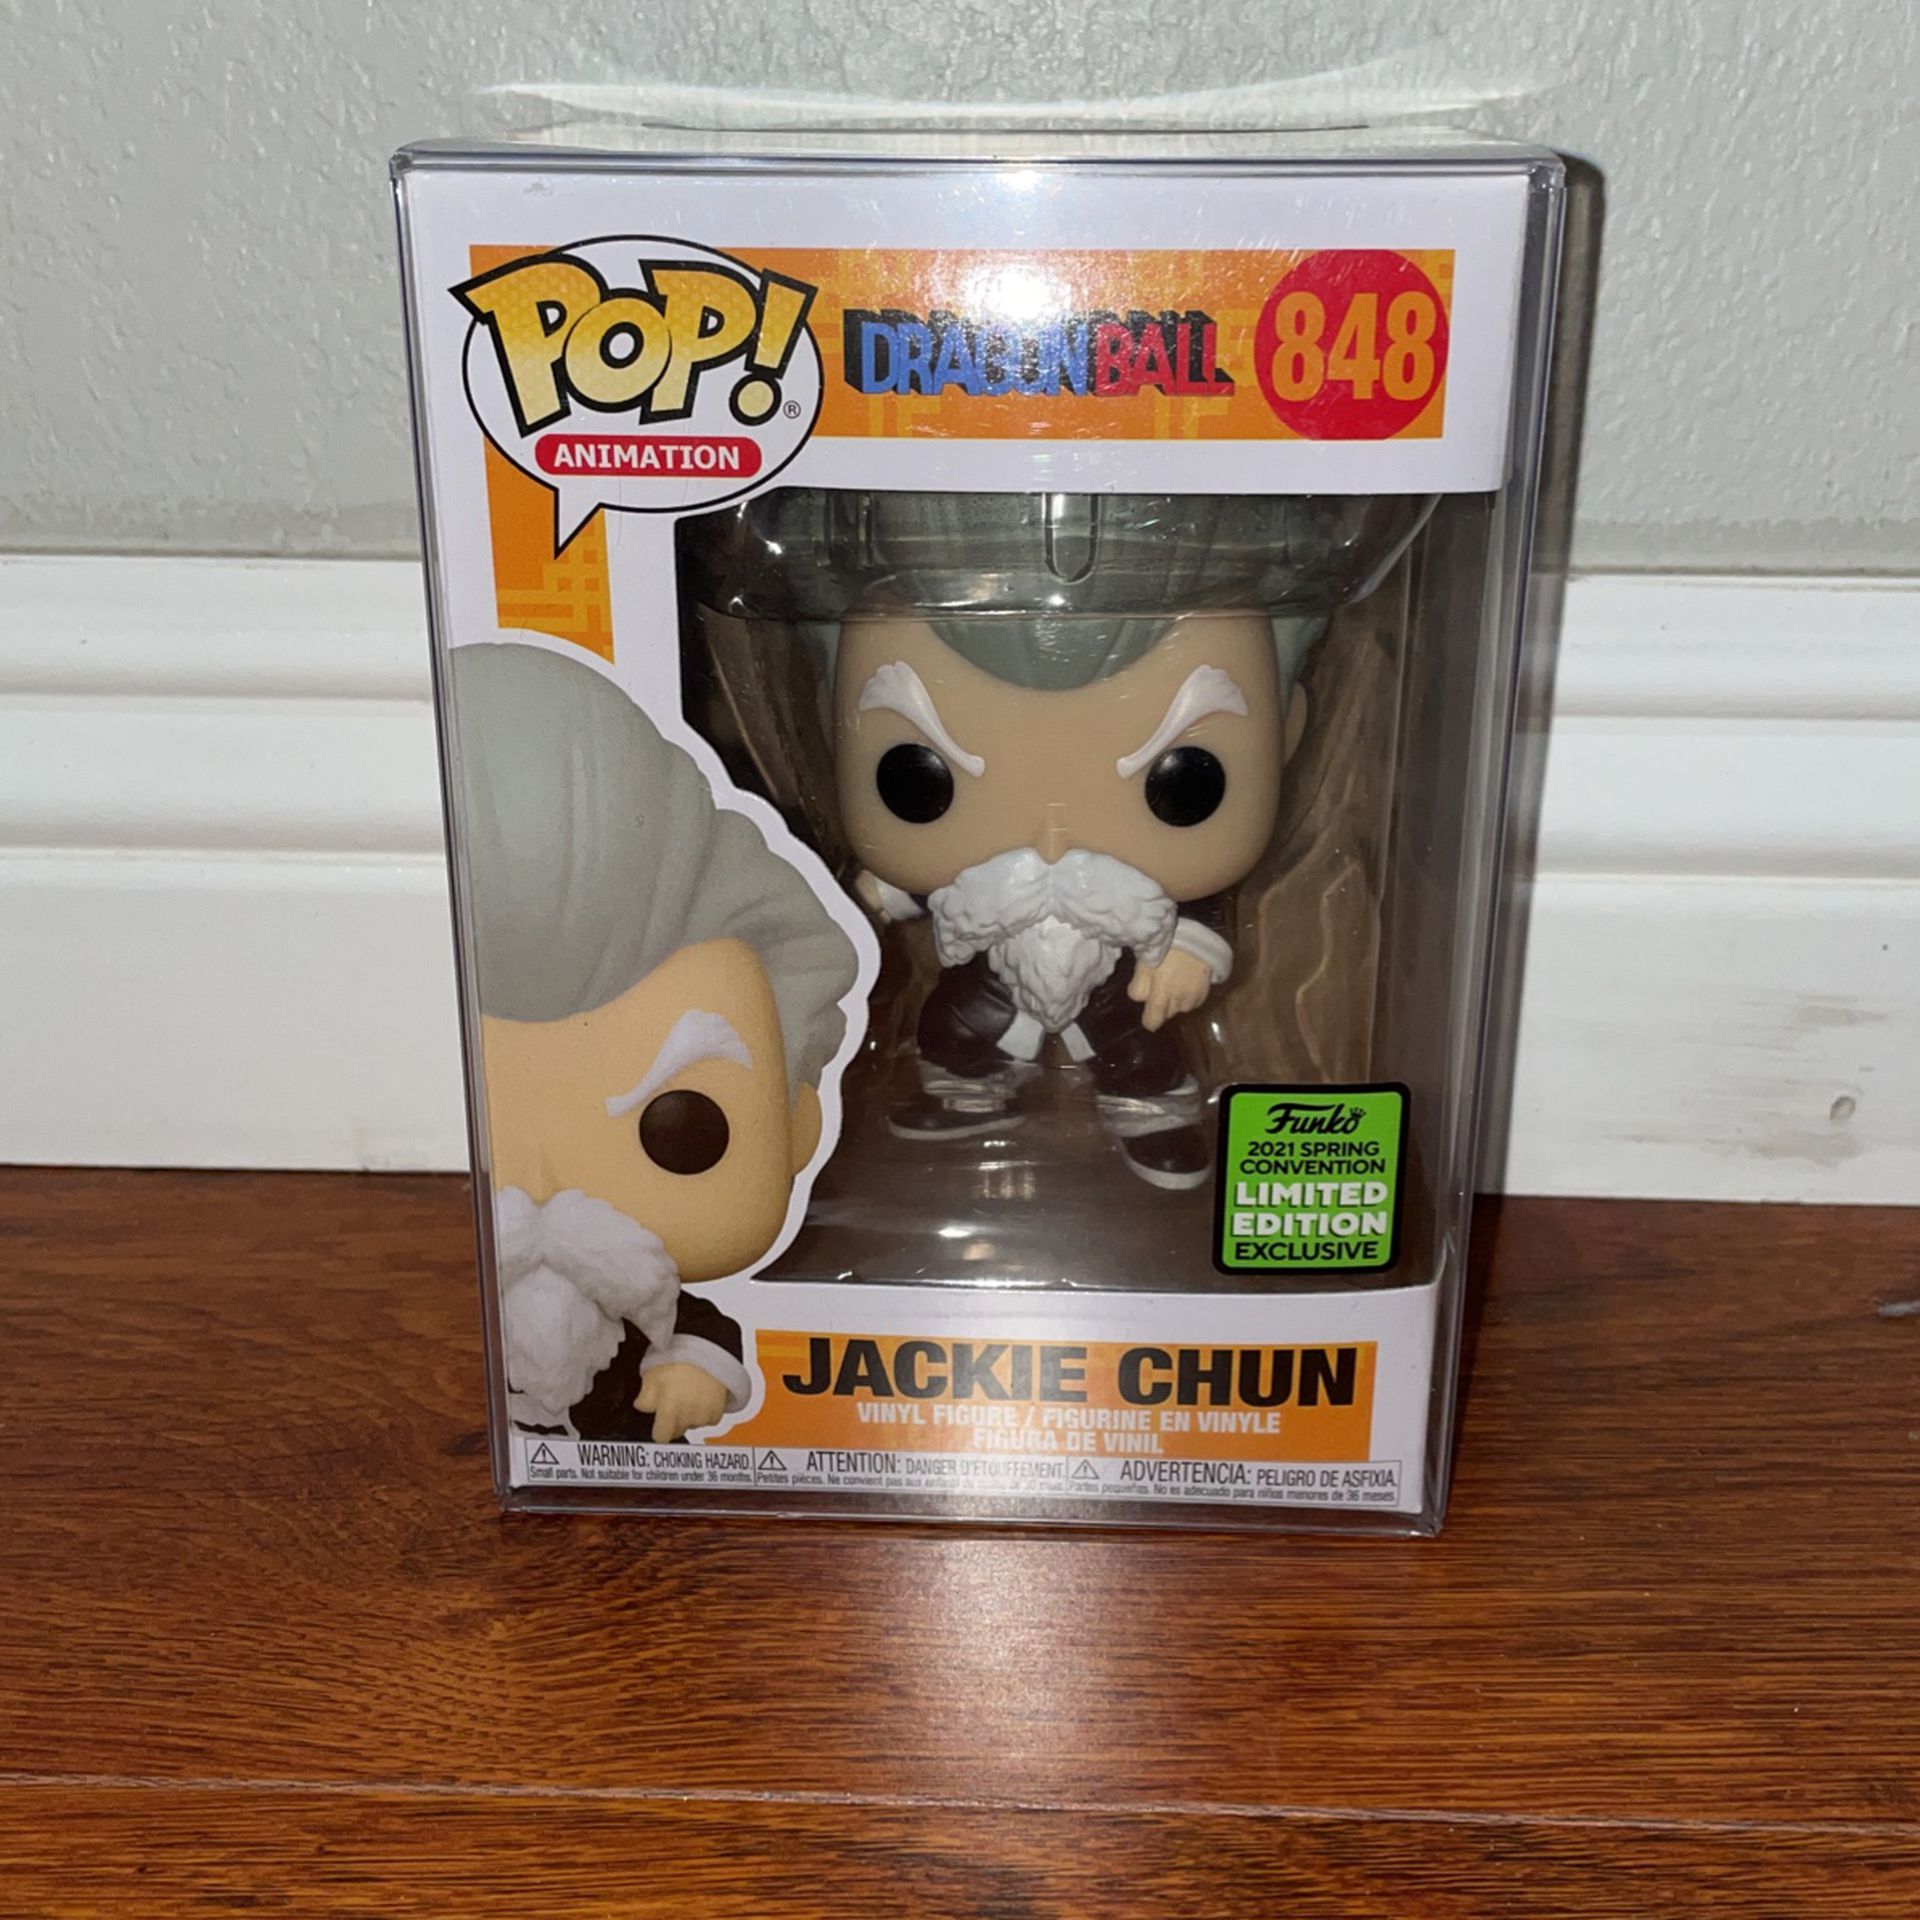 Funko Pop! DragonBall Z Jackie Chun #848 Spring Convention 2021 Limited Edition Exclusive